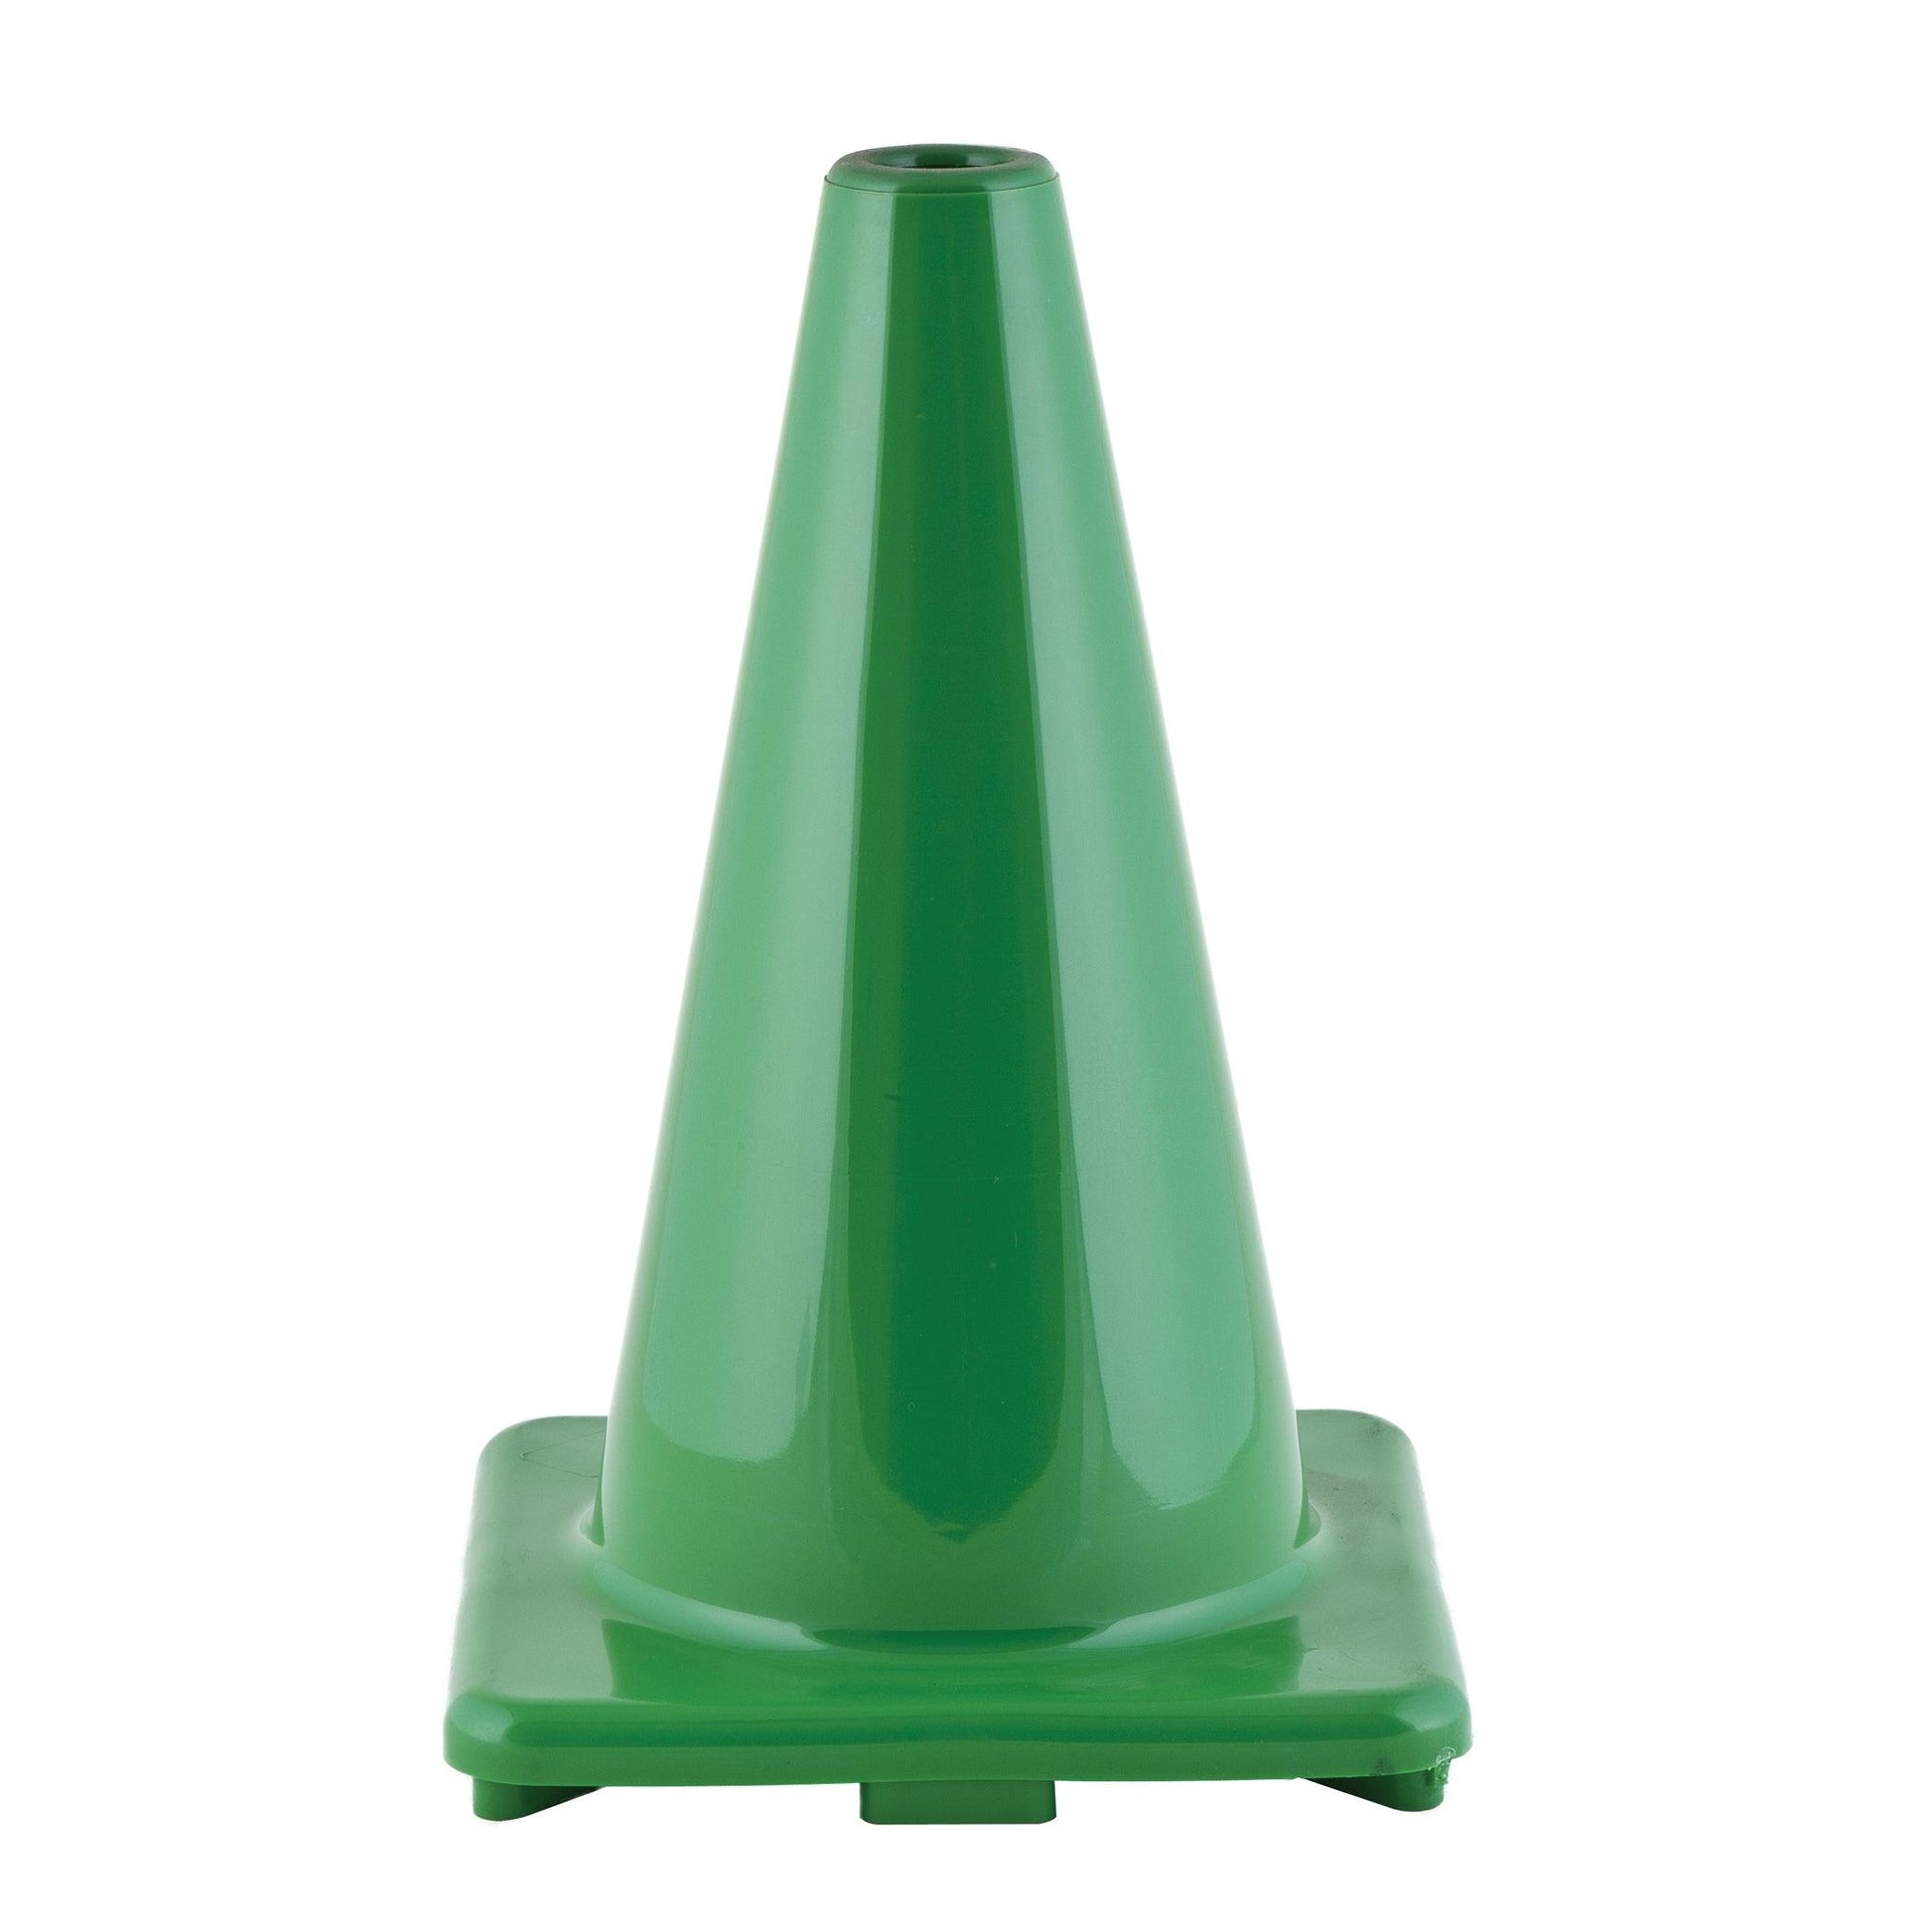 Hi-Visibility Flexible Vinyl Cone, weighted, 12", Green, Pack of 3 - Loomini